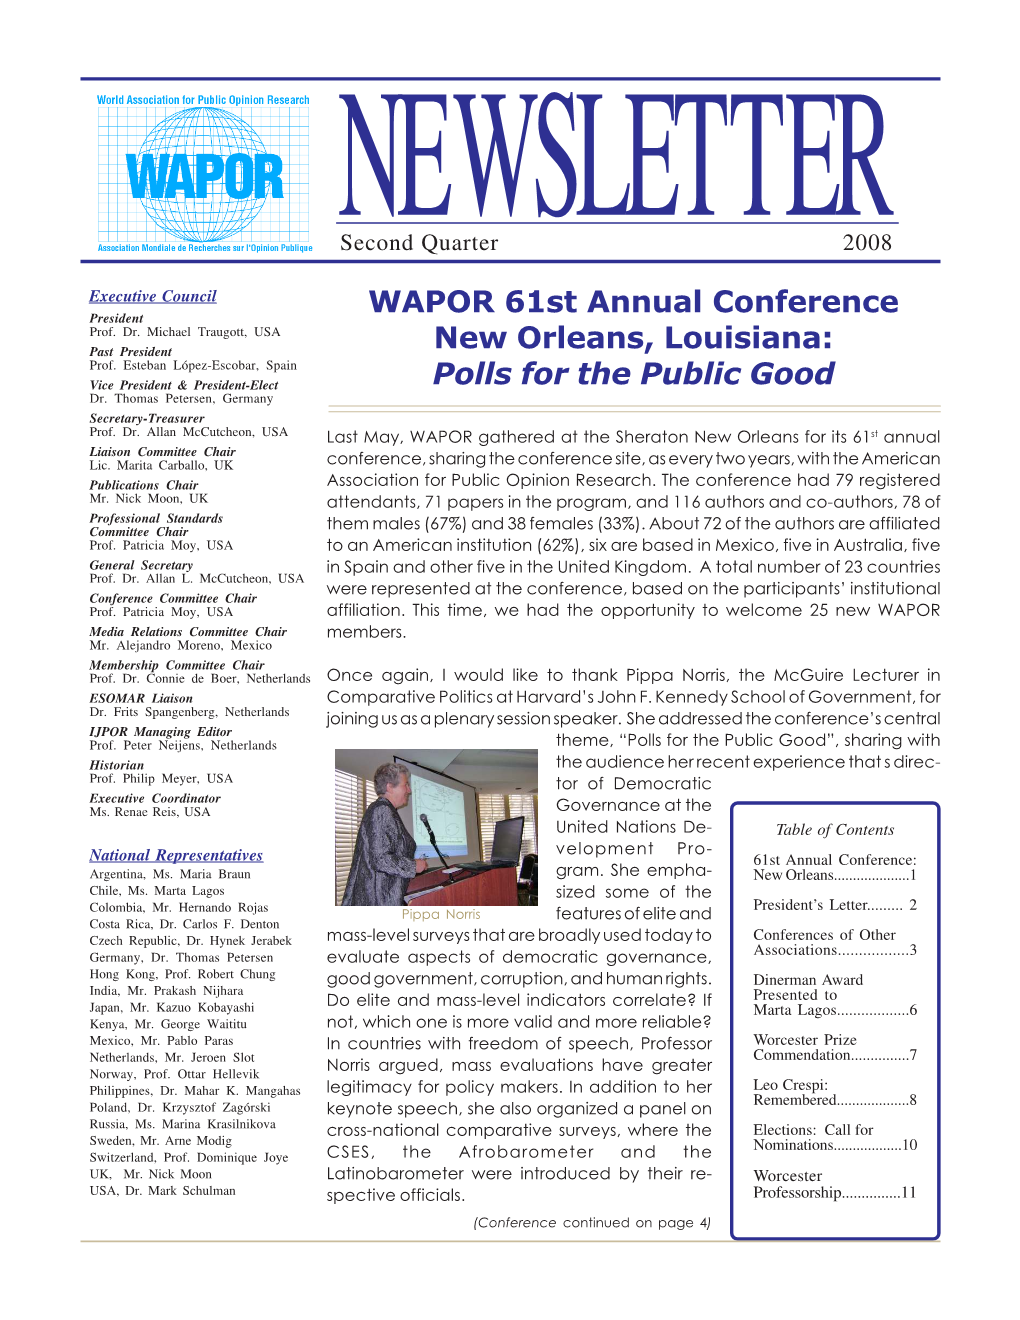 WAPOR 61St Annual Conference New Orleans, Louisiana: Polls for The